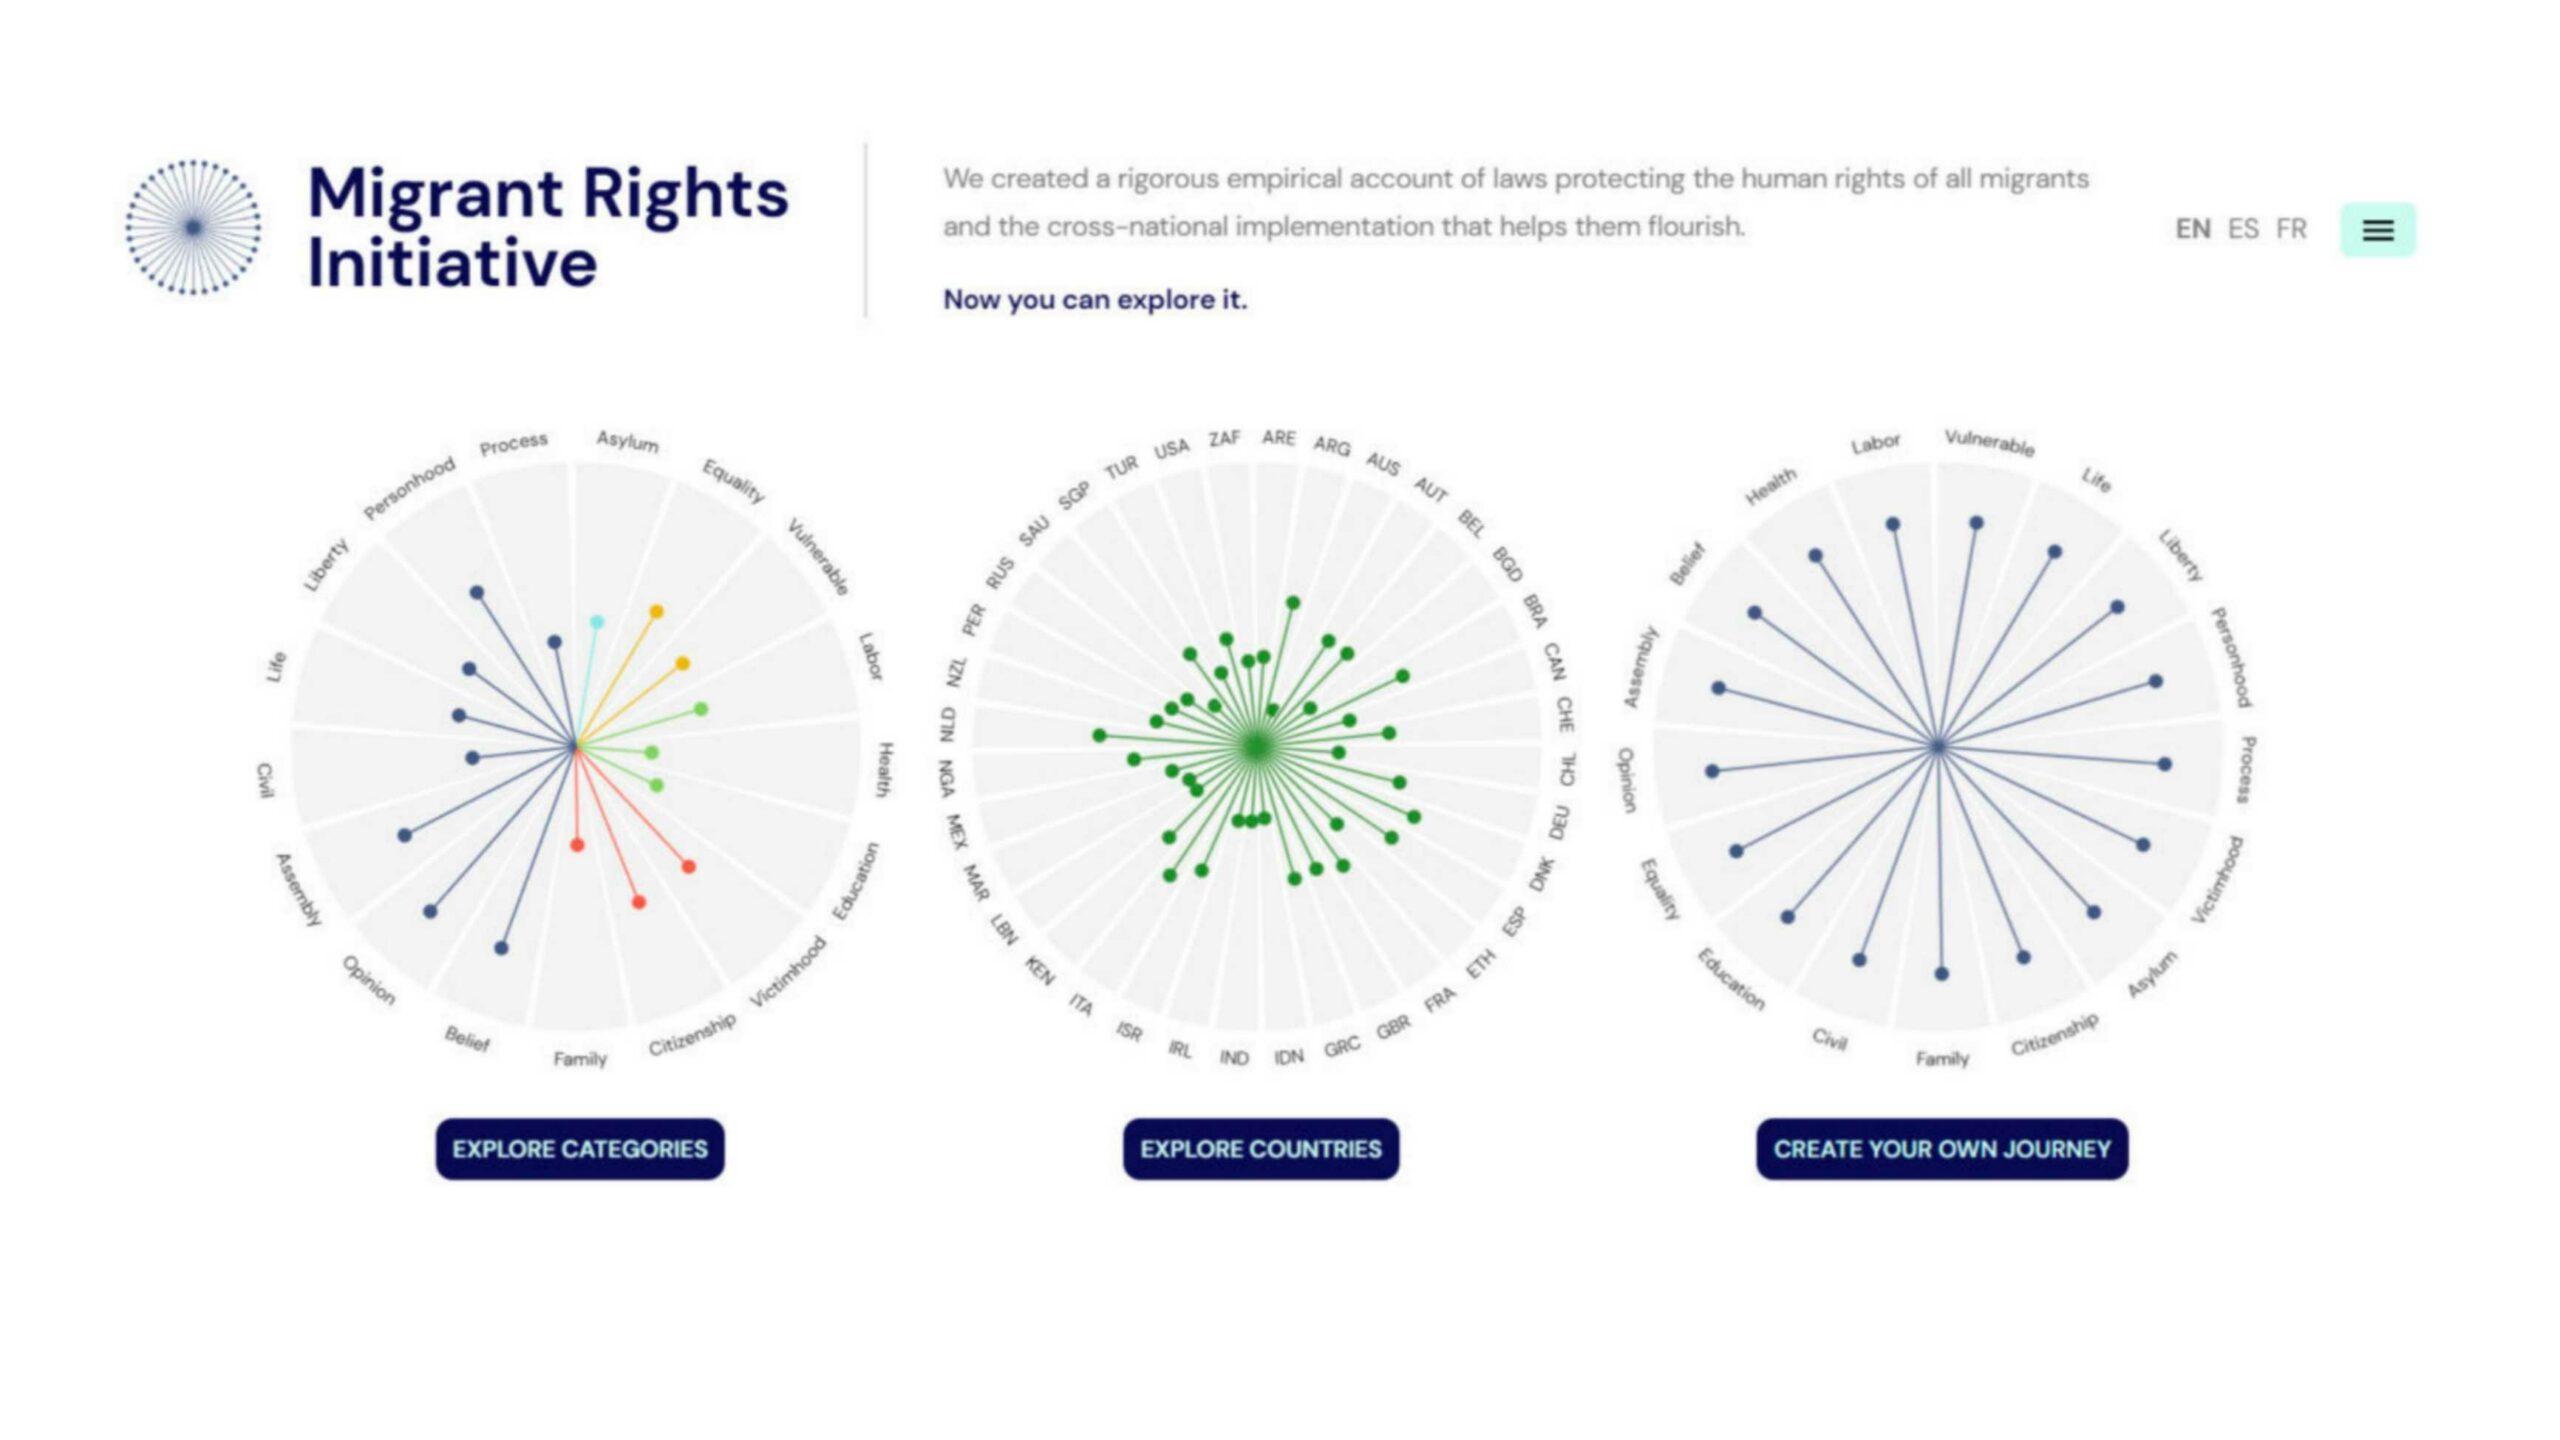 Product: A platform to explore migrant rights around the world — sociopúblico